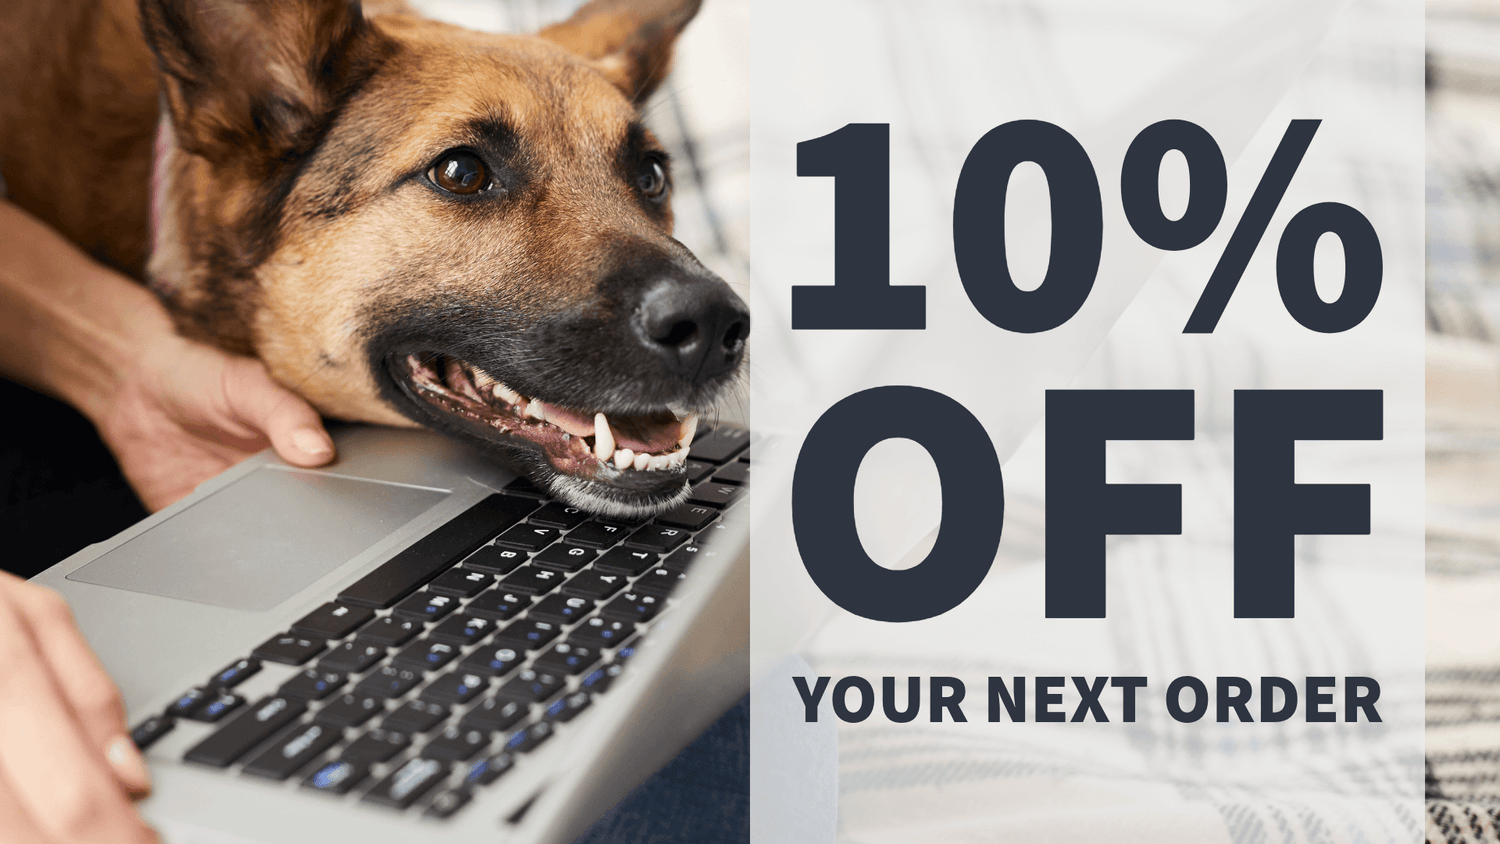 Image of a dog resting his head on a laptop keyboard looking on the screen, next to it the text “10% OFF YOUR NEXT ORDER”